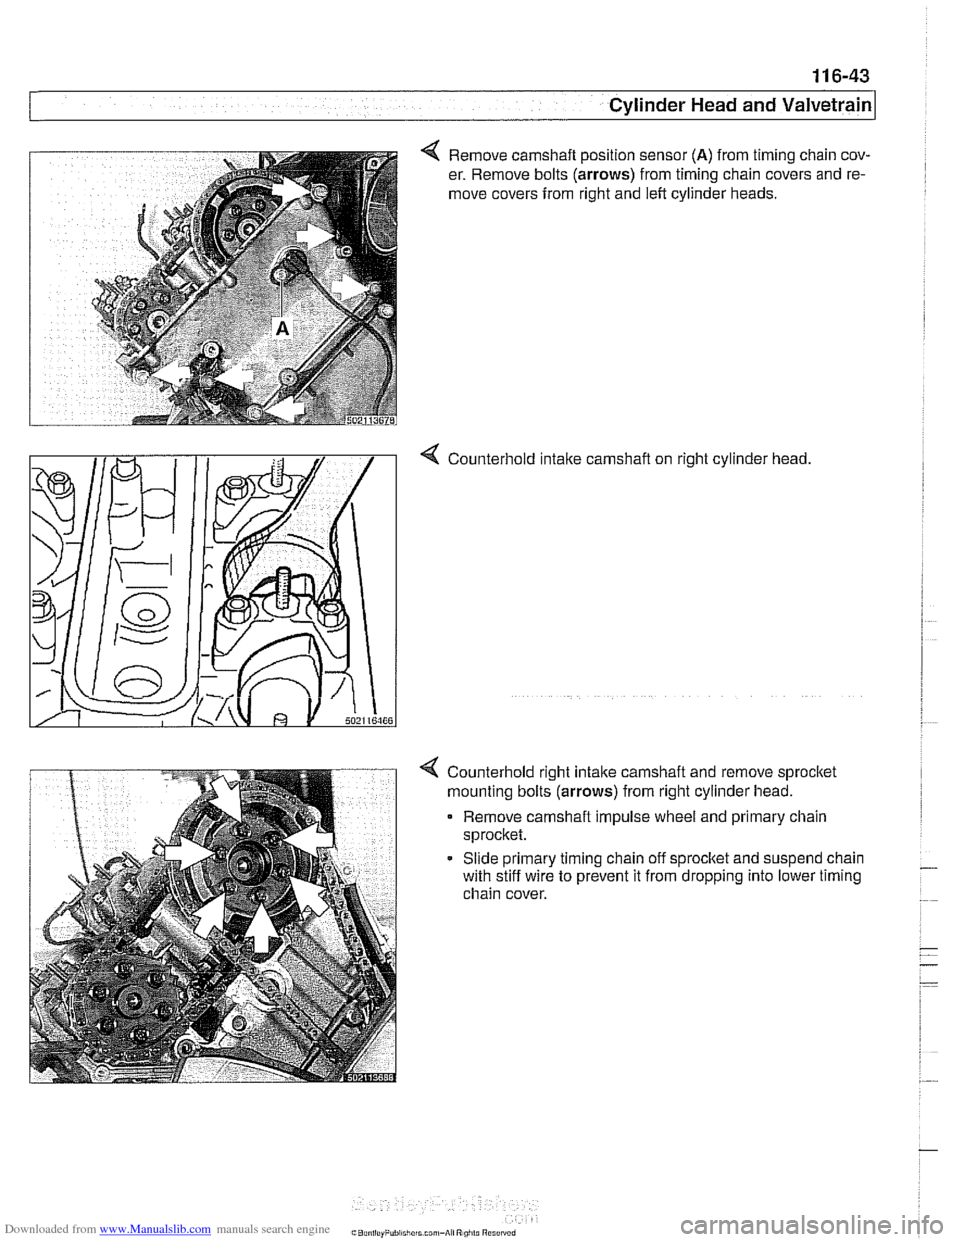 BMW 528i 1998 E39 Workshop Manual Downloaded from www.Manualslib.com manuals search engine 
Cylinder Head and valvetrain1 
4 Remove camshaft position sensor (A) from timing chain cov- 
er.  Remove bolts 
(arrows) from timing chain cov